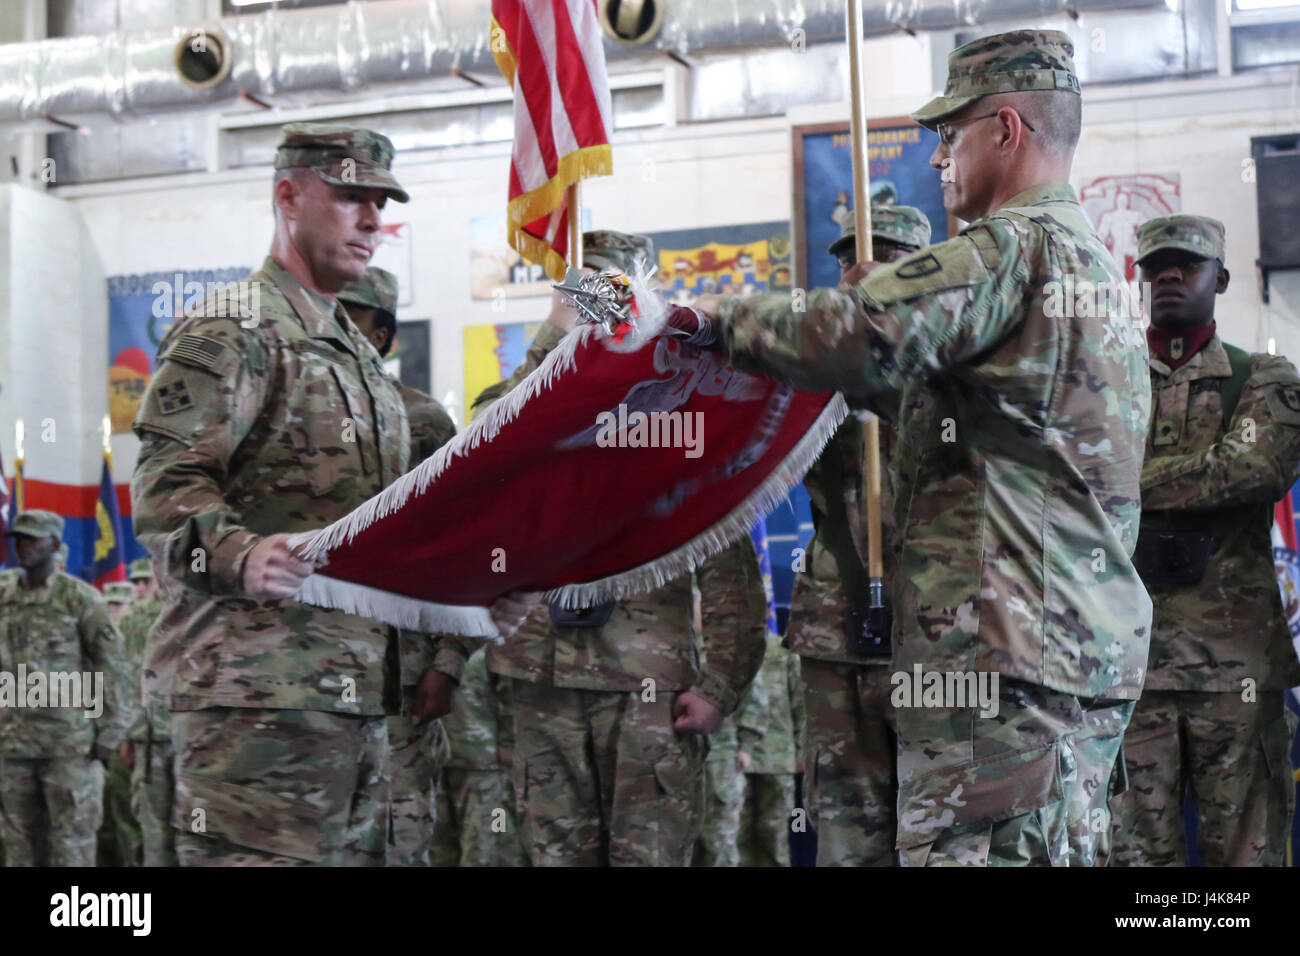 Col. Bruce Syvinski (right), the commander of the 86th Combat Support Hospital, and Command Sgt. Maj. Daryl Forsythe, the command sergeant major for the 86th CSH, uncases the unit’s colors, during the transfer of authority ceremony, in the Zone 1 Fitness Center, Camp Arifjan, Kuwait, May 5. The ceremony marked the last deployment for the 86th CSH, as it will re-designate into a field hospital when it returns from this rotation. (U.S. Army photo by Sgt. Bethany Huff, ARCENT Public Affairs) Stock Photo